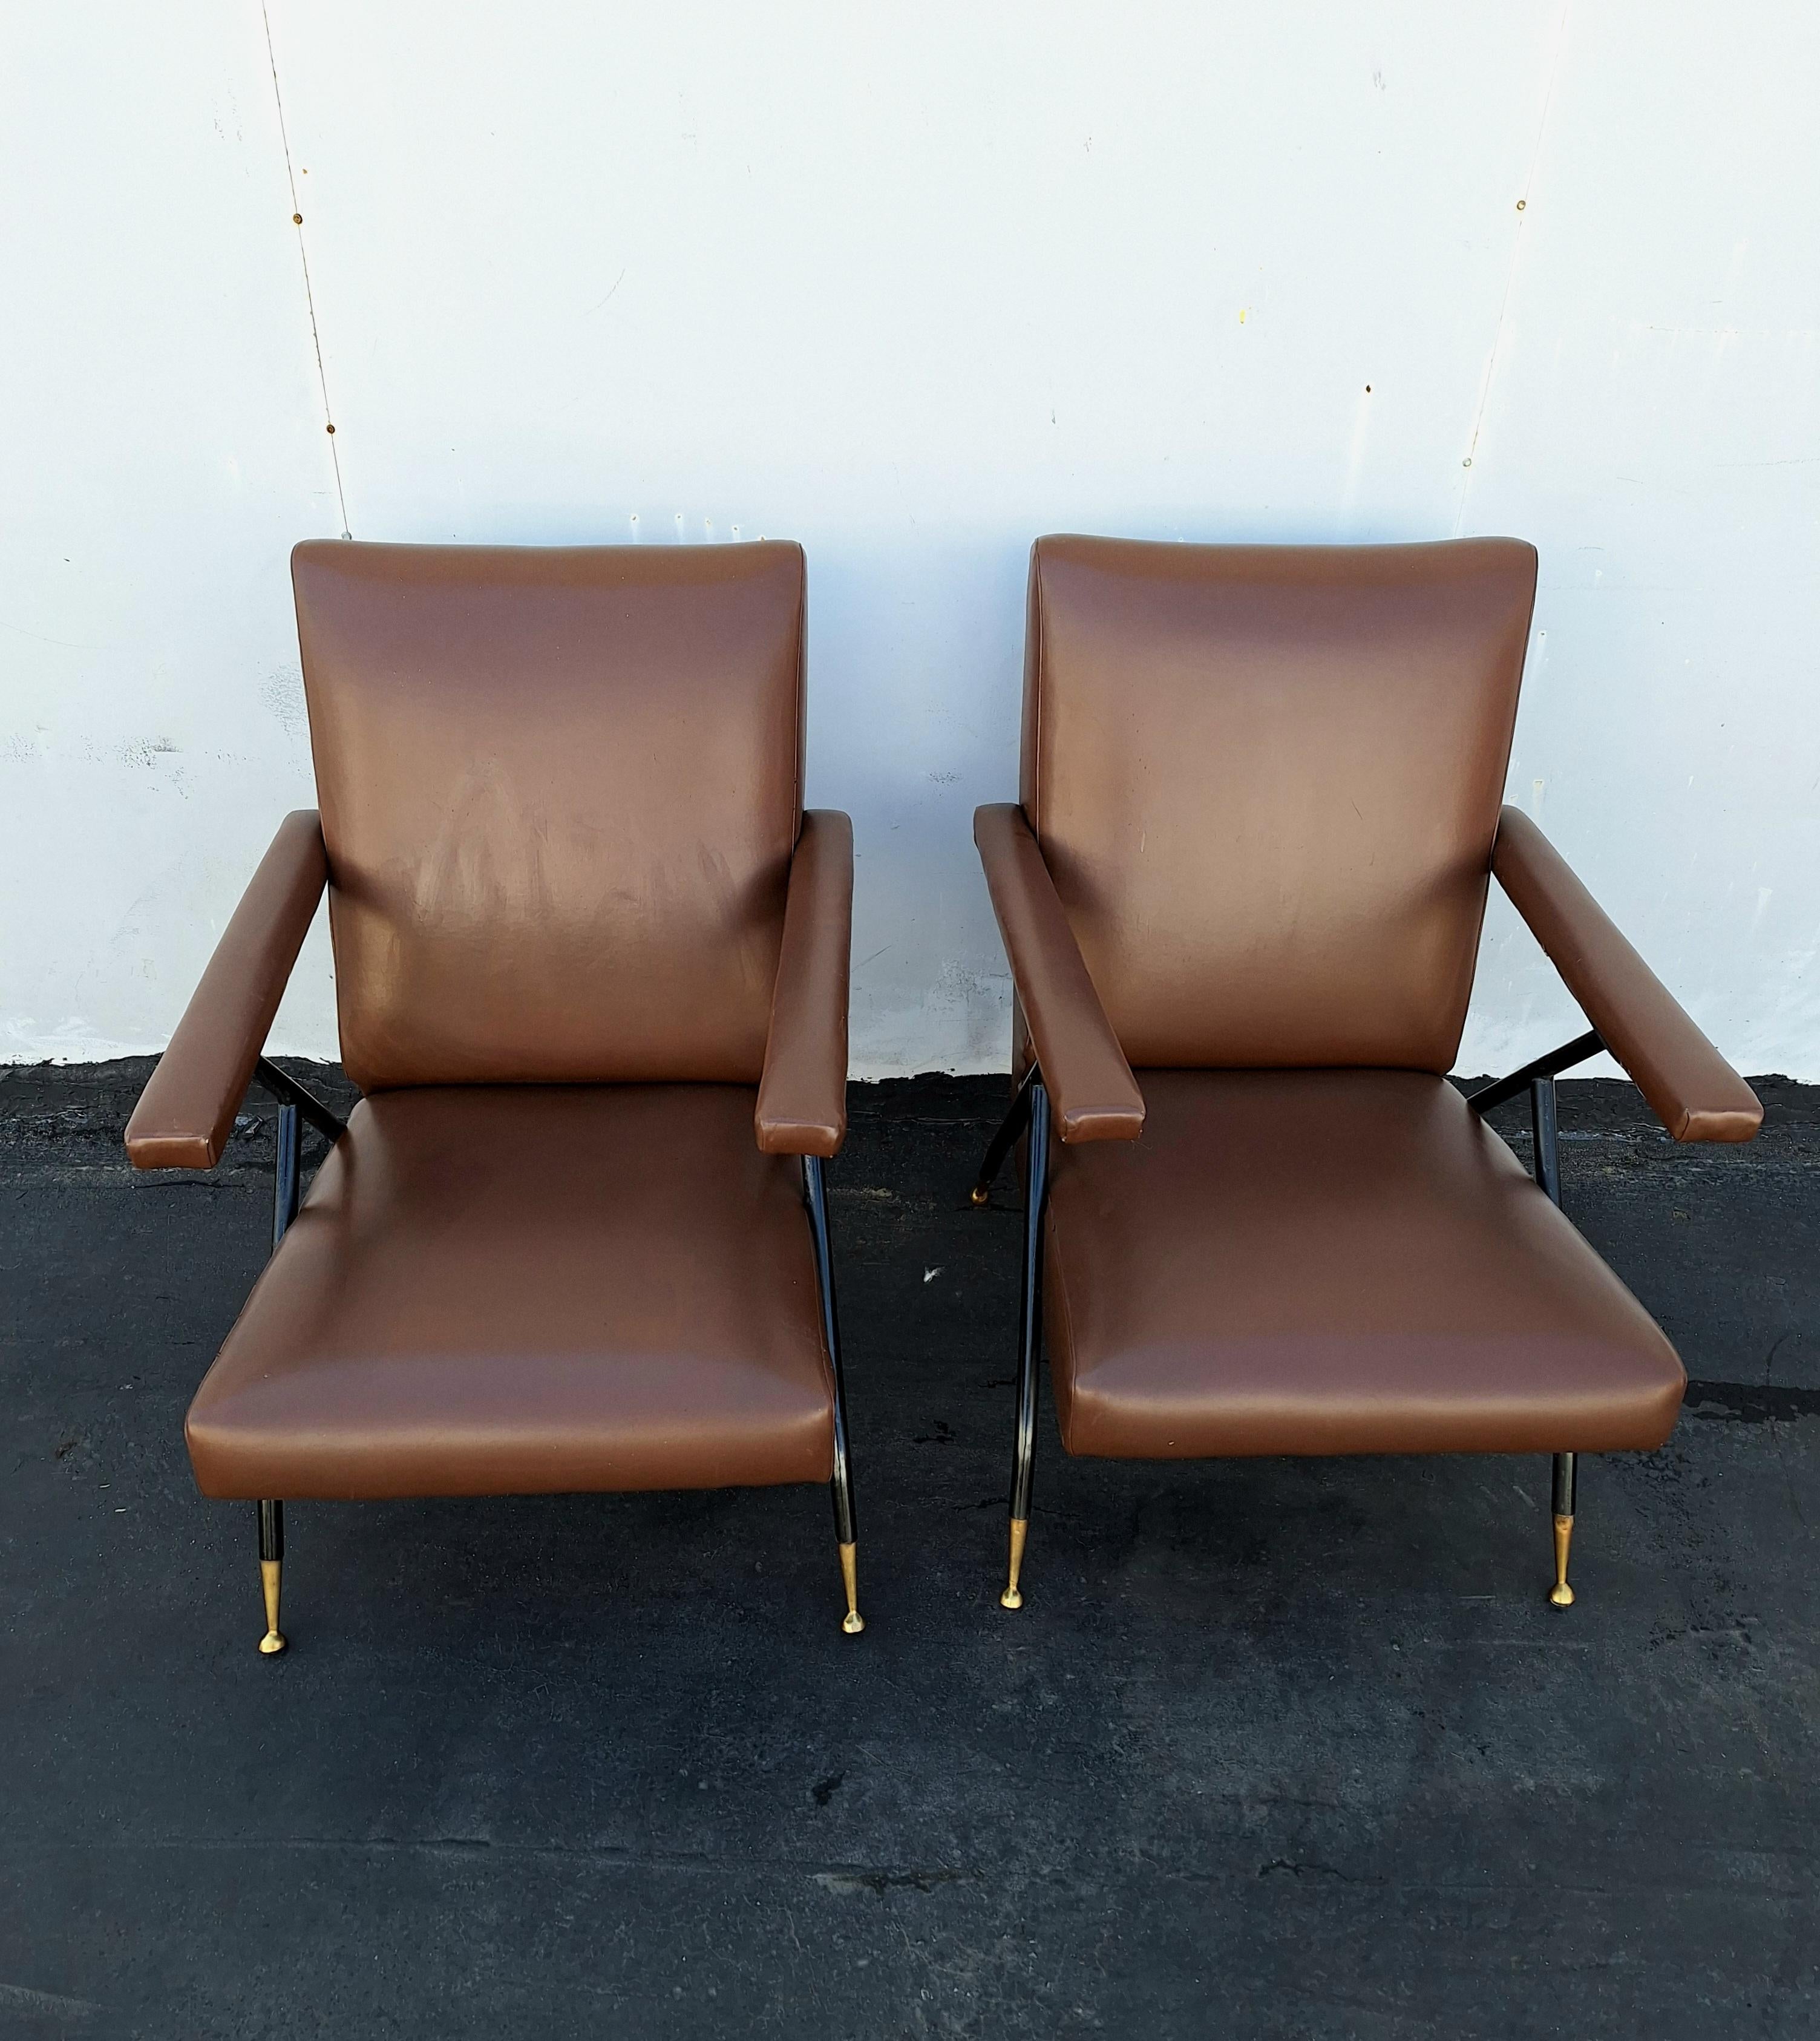 PVC Italian Club Chairs from the 1960 s  For Sale